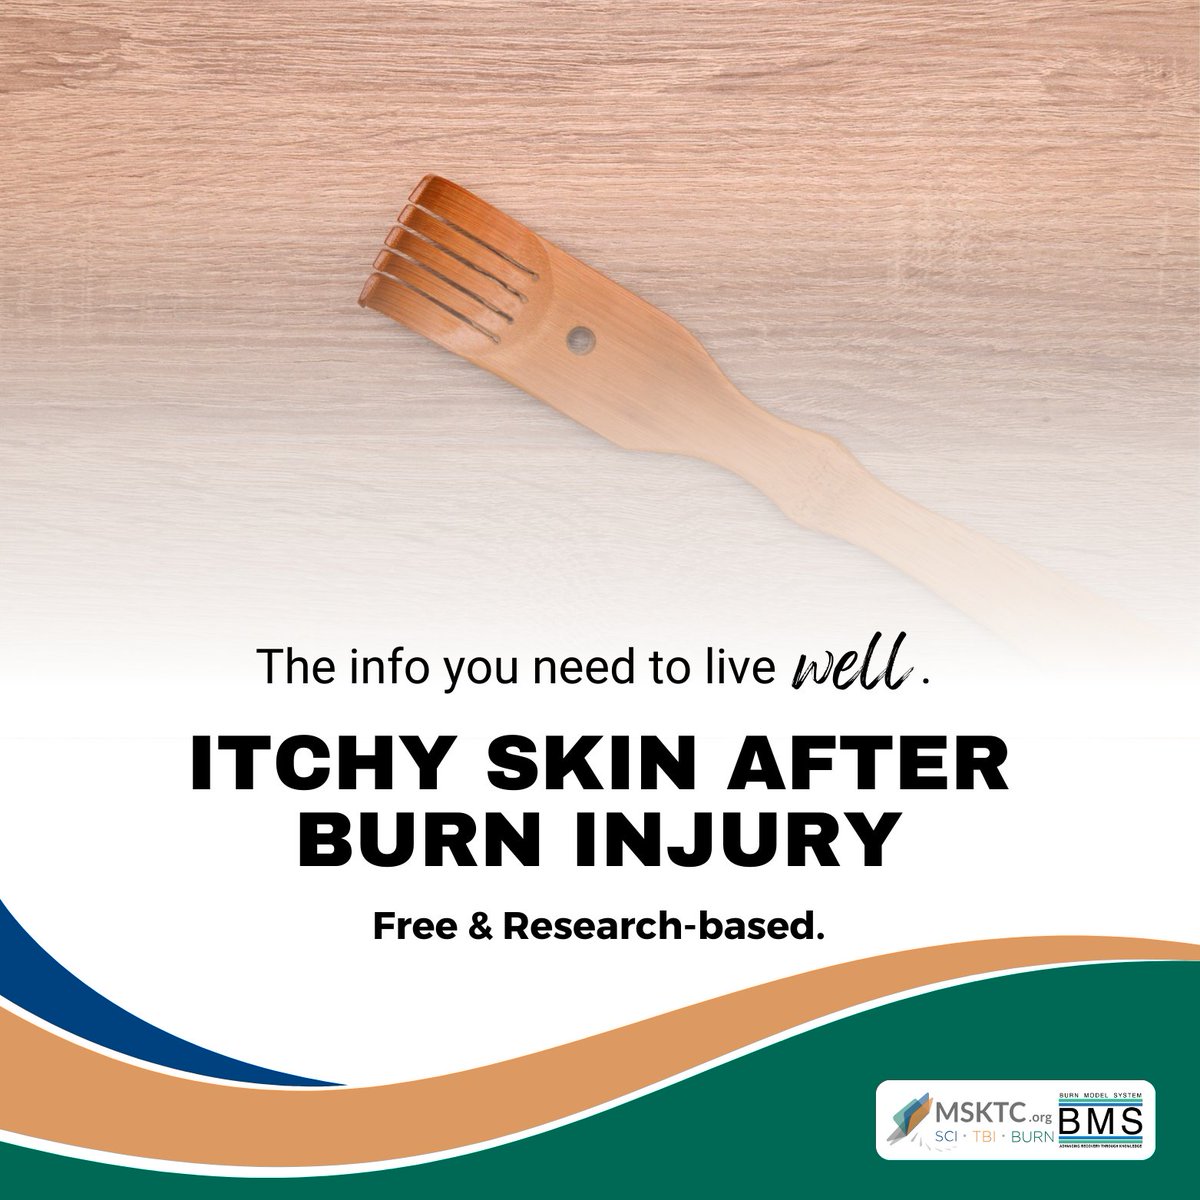 Itching can get in the way of everyday activities, so it is important to learn the ways to decrease and manage itching after #burninjury. This slideshow from #MSKTC can help. msktc.org/burn/slideshow…